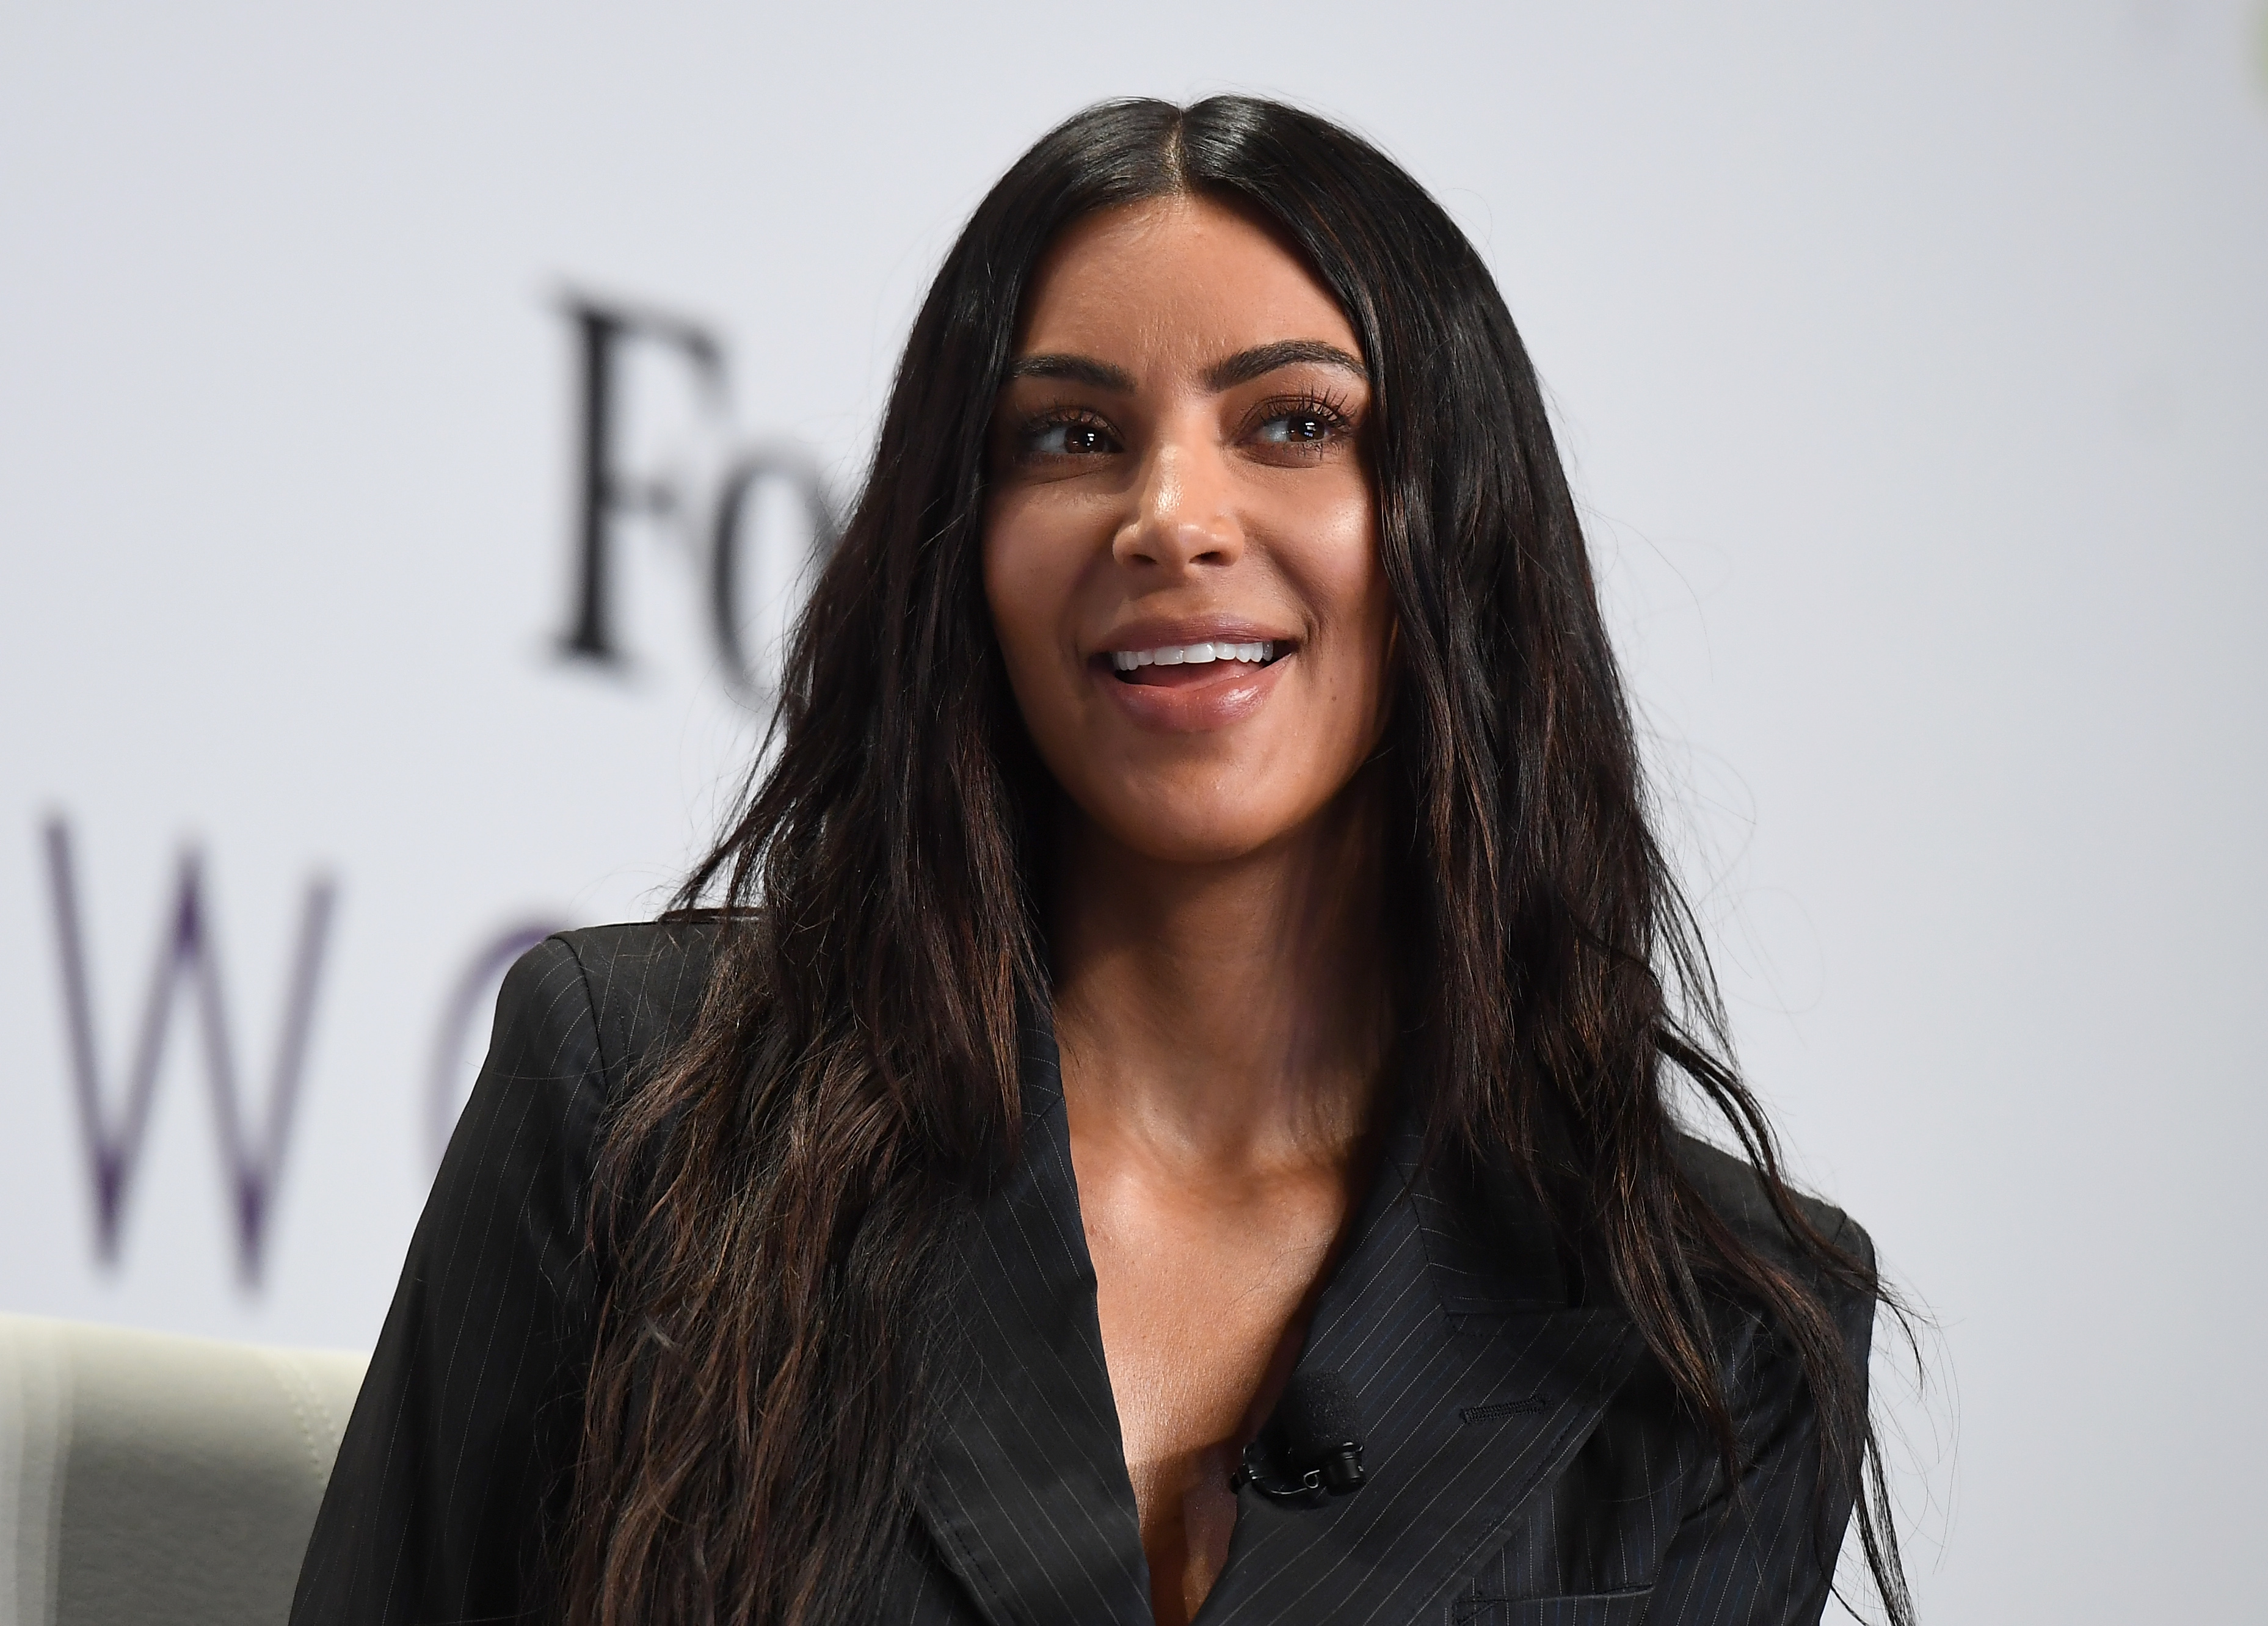 Kim Kardashian attends the 2017 Forbes Women's Summit at Spring Studios on June 13, 2017 in New York City. (ANGELA WEISS&mdash;AFP/Getty Images)